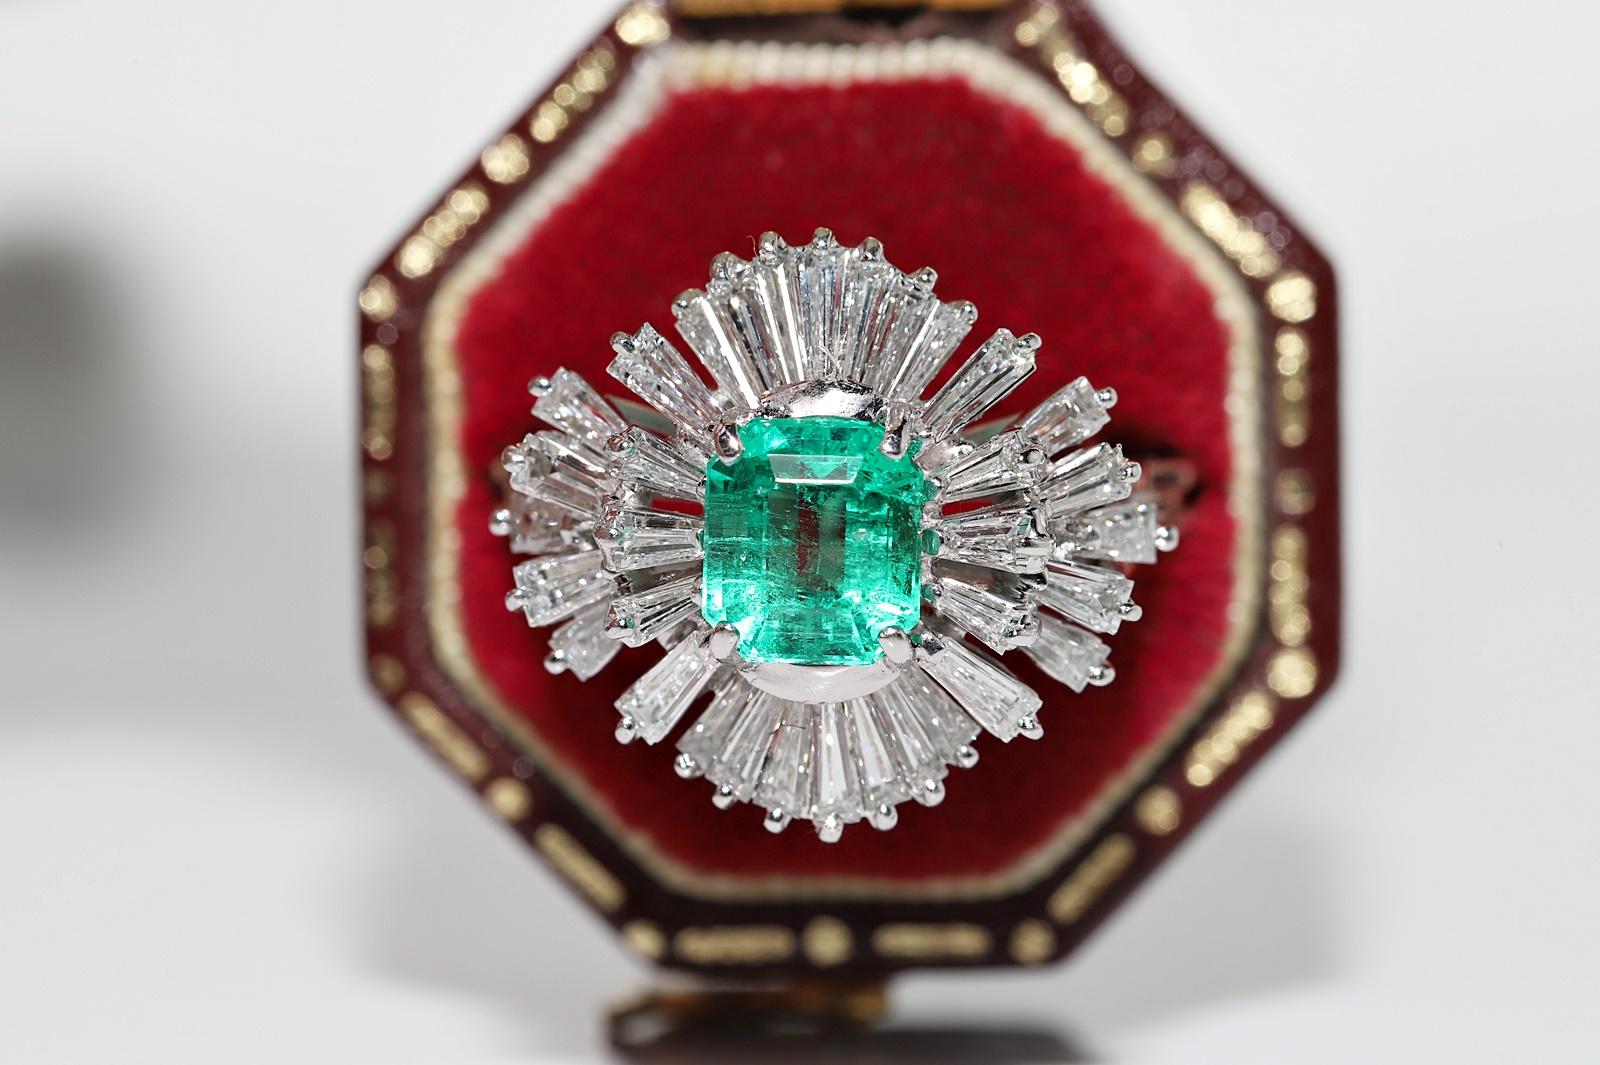 In very good condition.
Total weight is 5.9 grams.
Totally is diamond 1.90 ct.
The diamond is has G color and vvs-vs clarity.
Totally is emerald 1.30 ct.
Ring size is US 9 (We can make any size)
Box is not included.
Please contact for any questions.